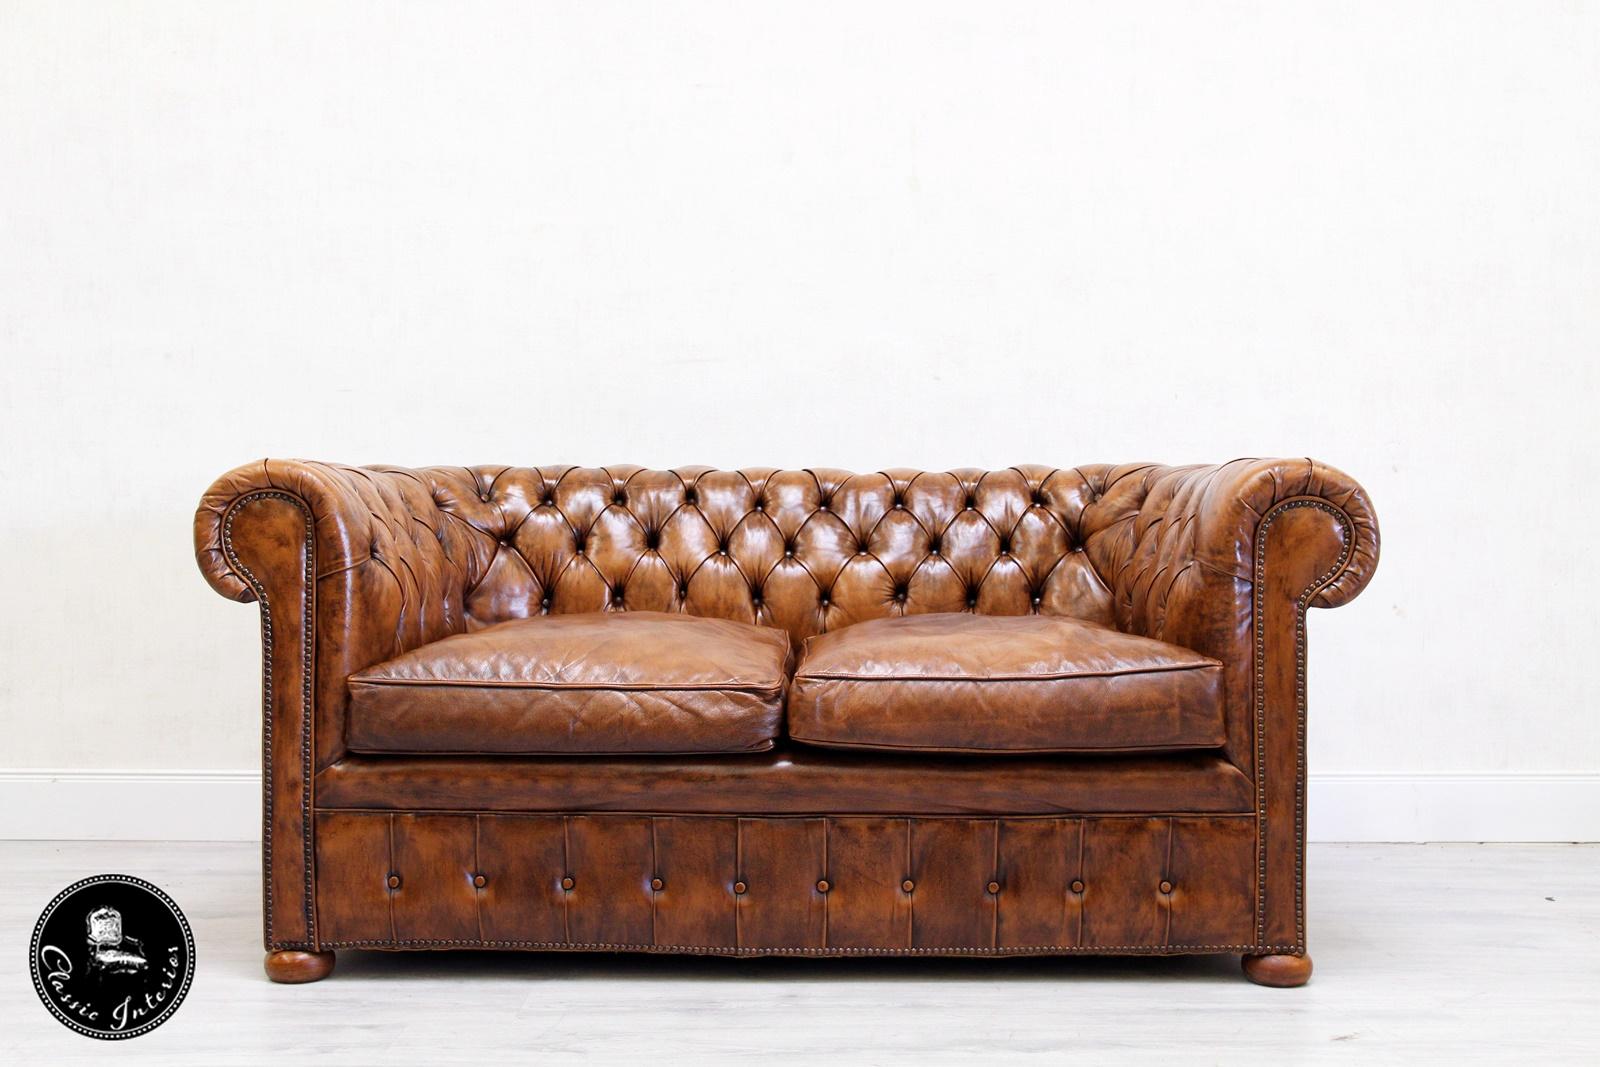 2 chesterfield real leather two-seat sofas in original design
Very comfortable and with beautiful patina
Condition: The sofas are in a very good condition
sofa
Measures: Height x 77cm, length x 170cm, depth x 90cm.
Cushion is in good condition